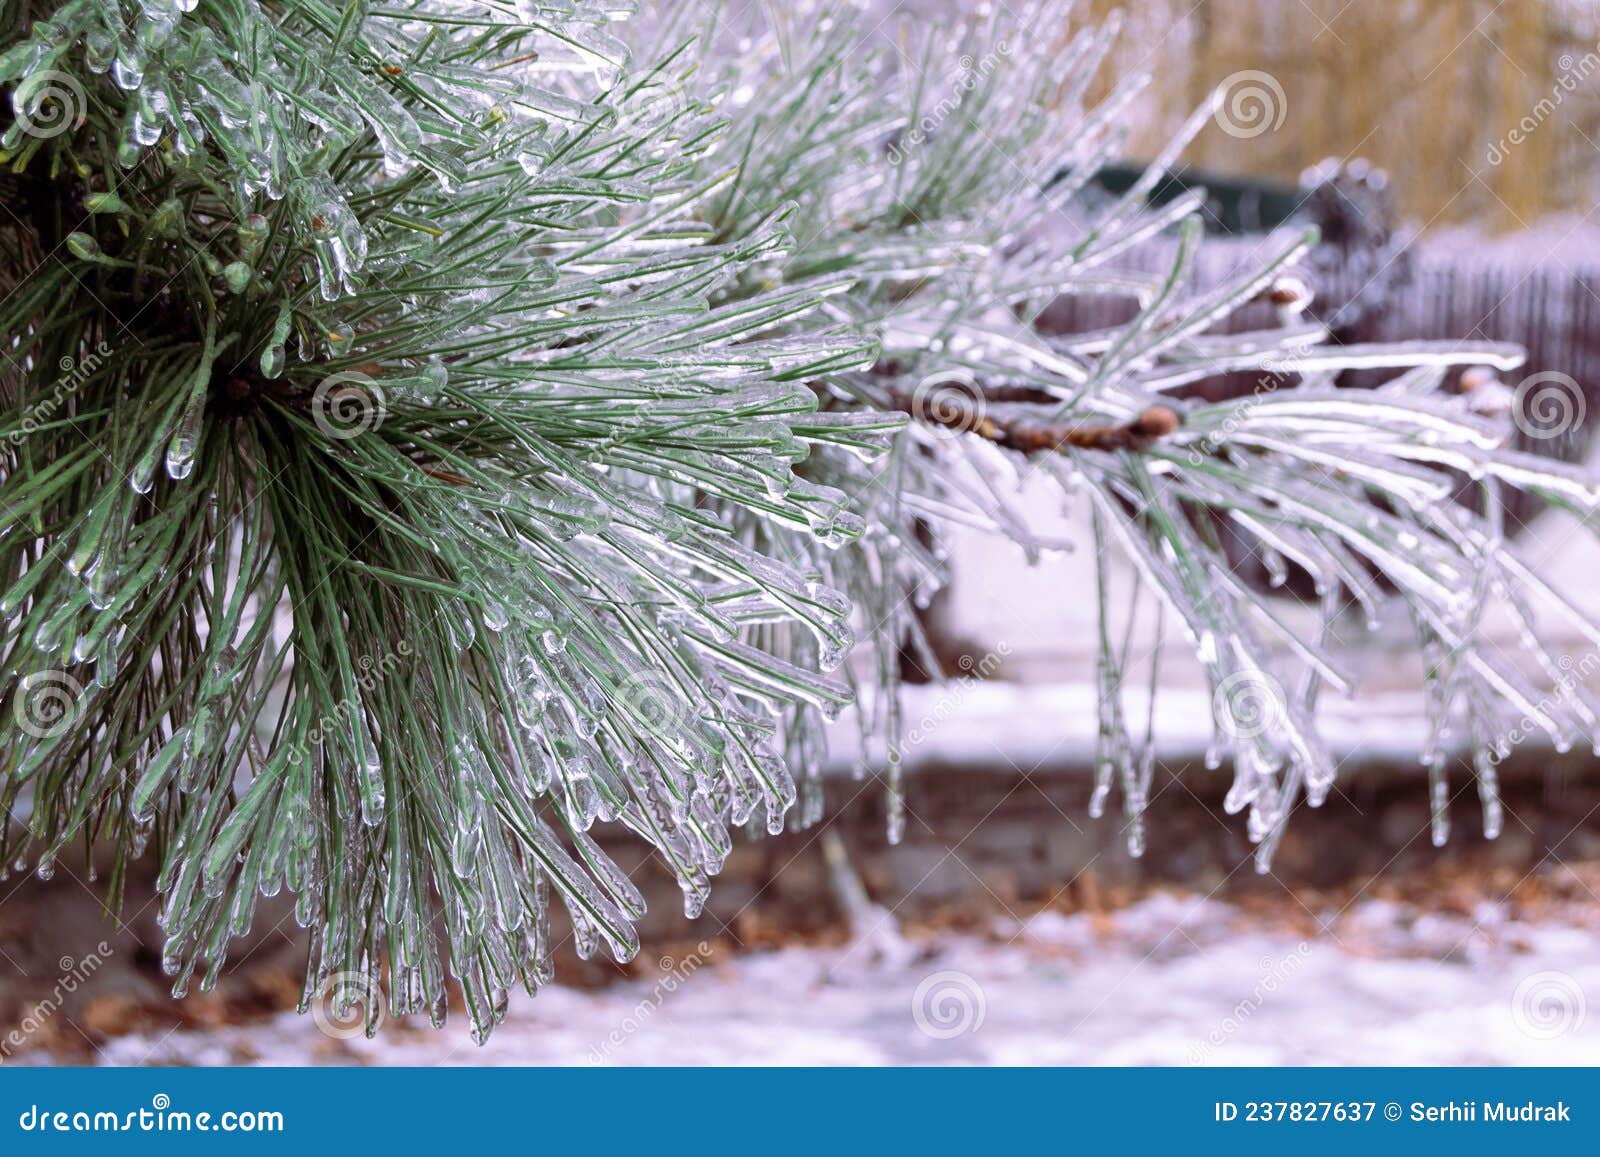 green pine needles incased in ice during ice storm